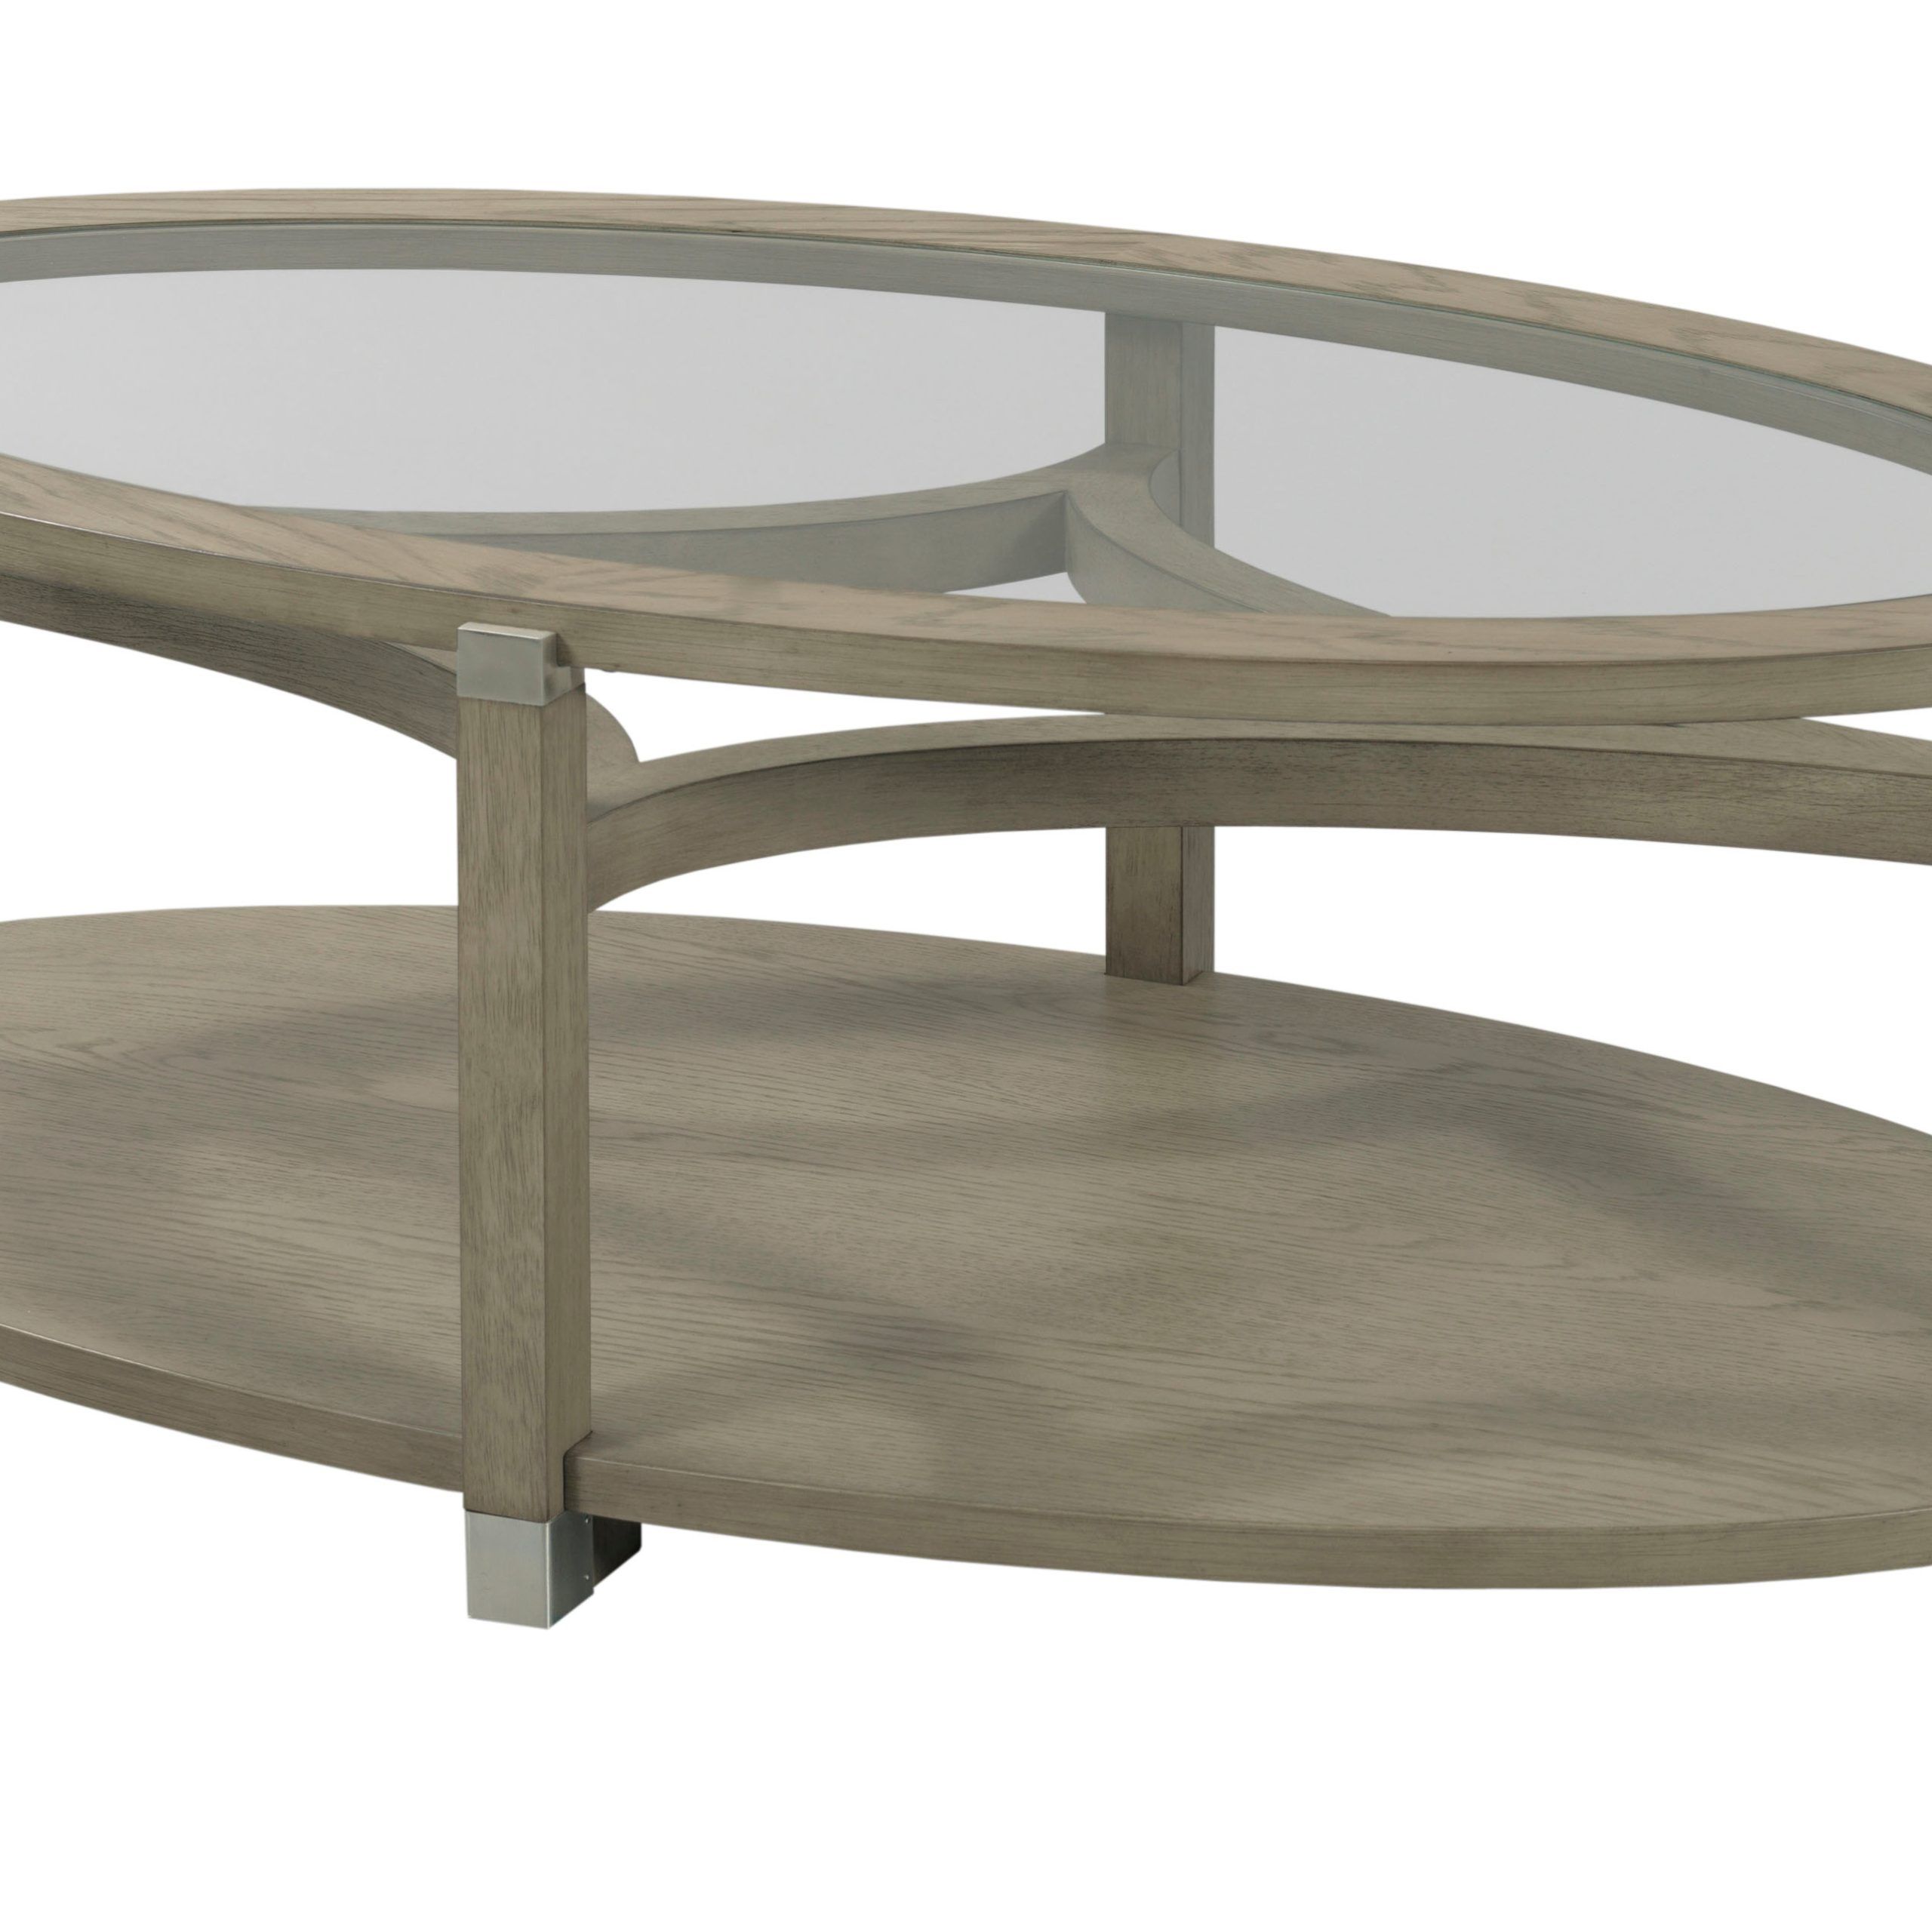 Most Recently Released Tempered Glass Oval Side Tables Intended For Table Trends Solstice Oval Coffee Table With Tempered Glass Top (View 12 of 15)